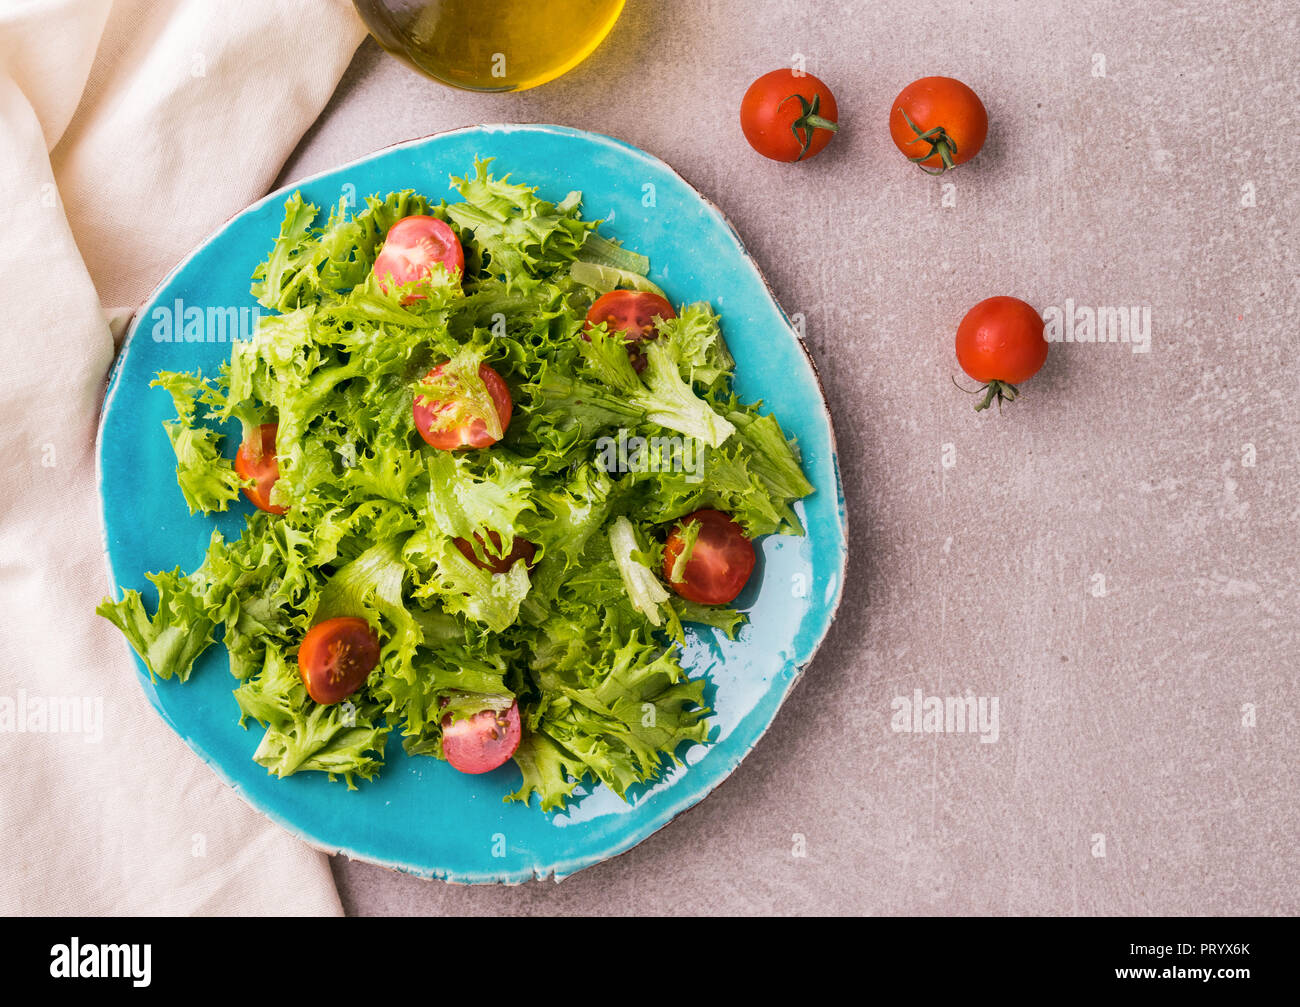 Salad with frisee and cherry tomatoes on blue ceramic plate. Healthy food concept. Top view, view from above. Light stone table background. Stock Photo